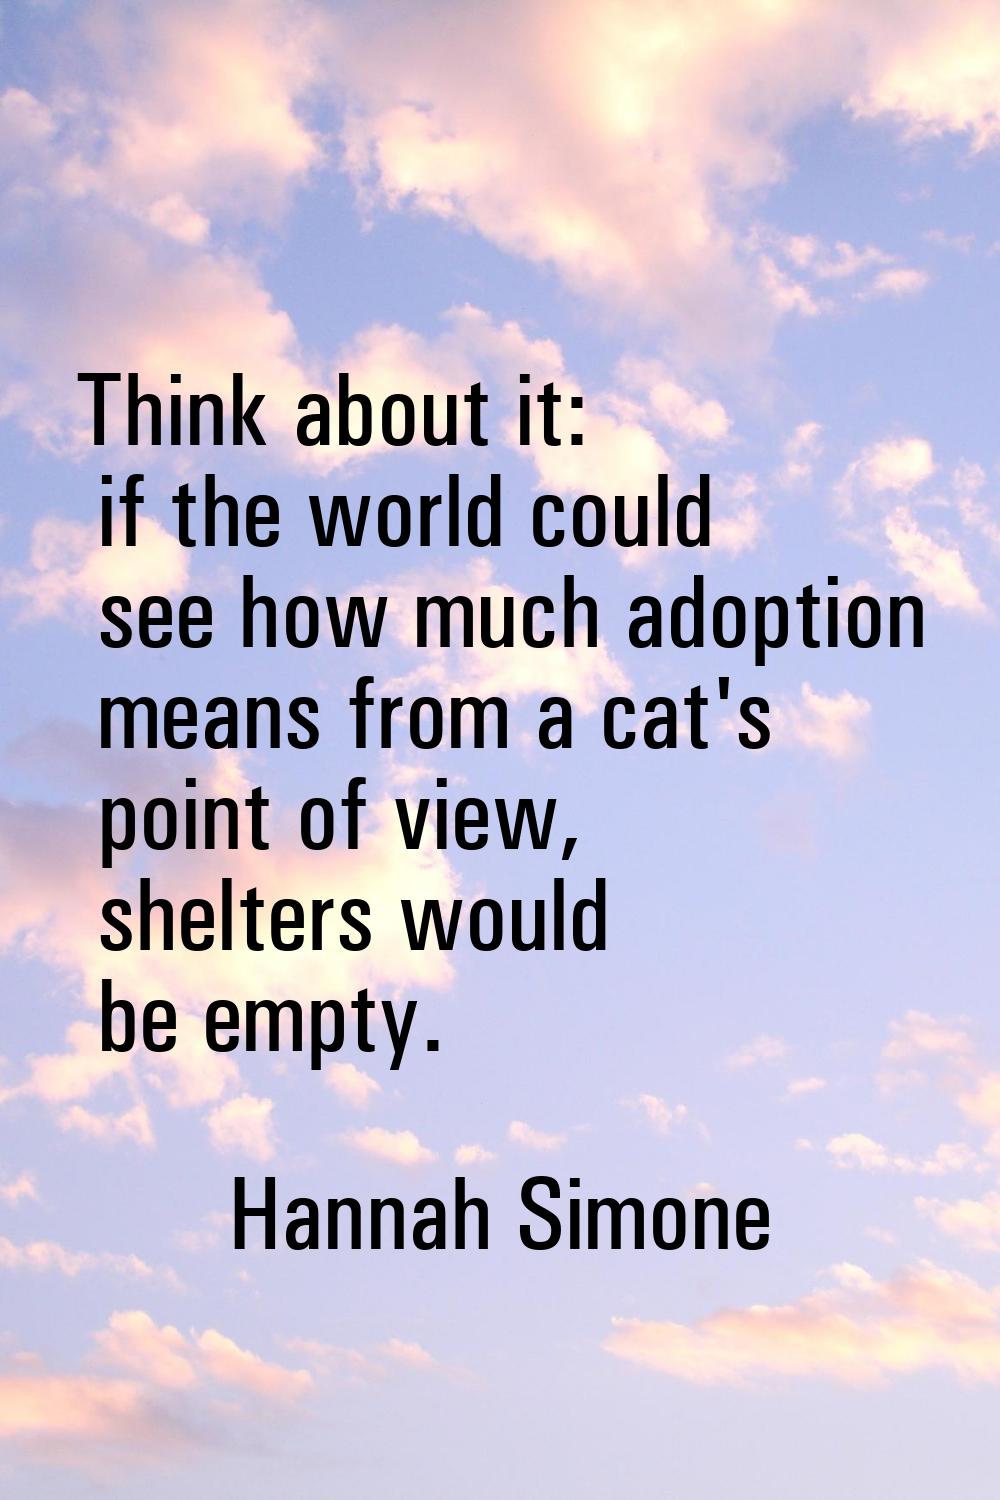 Think about it: if the world could see how much adoption means from a cat's point of view, shelters